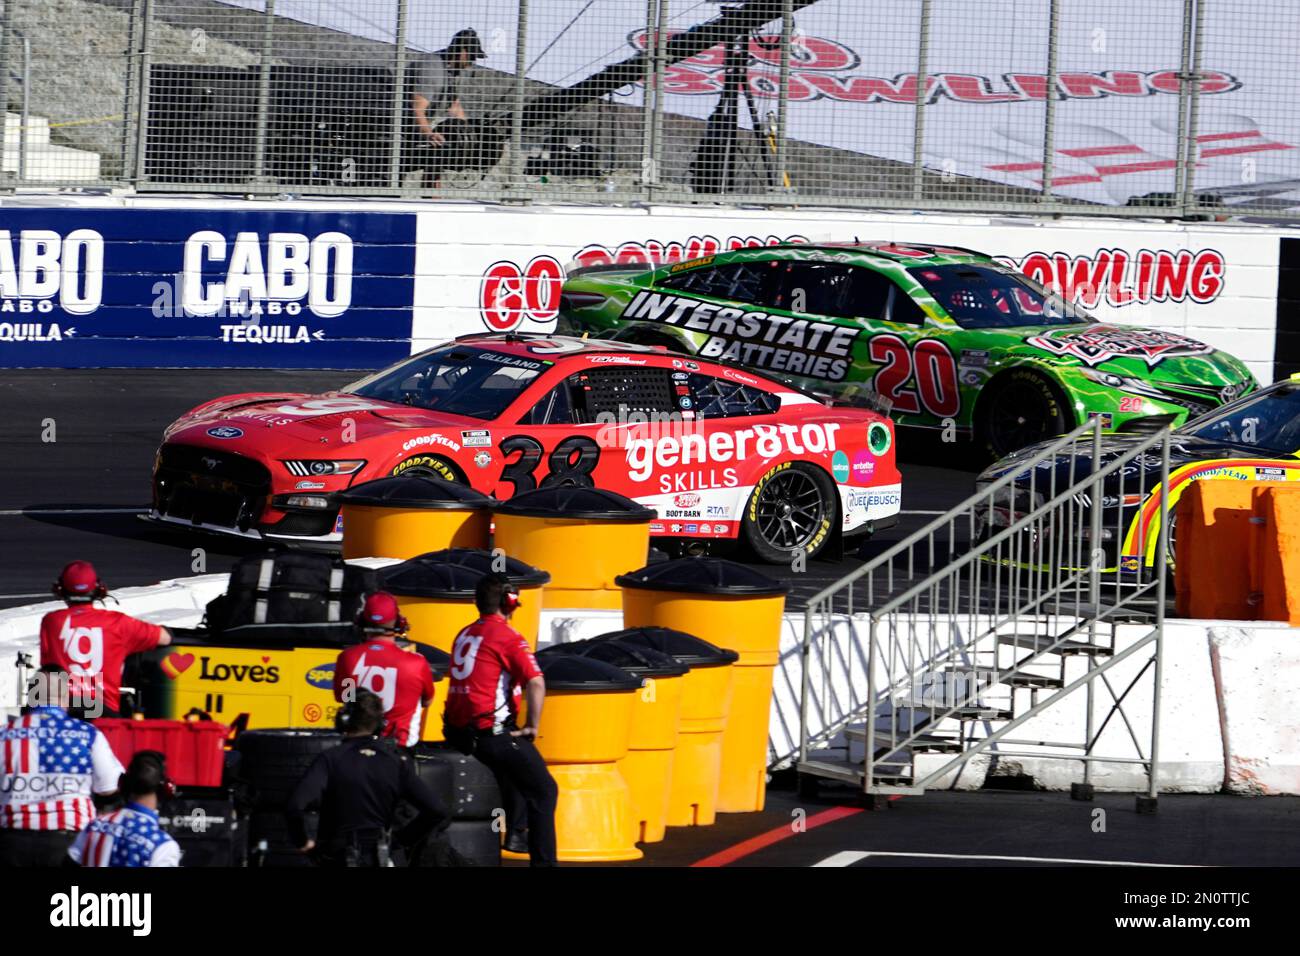 NASCAR Cup Series driver Christopher Bell (20), right, spins out as driver Todd Gilliland (38) passes by during the qualifying portion of the Busch Light Clash NASCAR exhibition auto race at Los